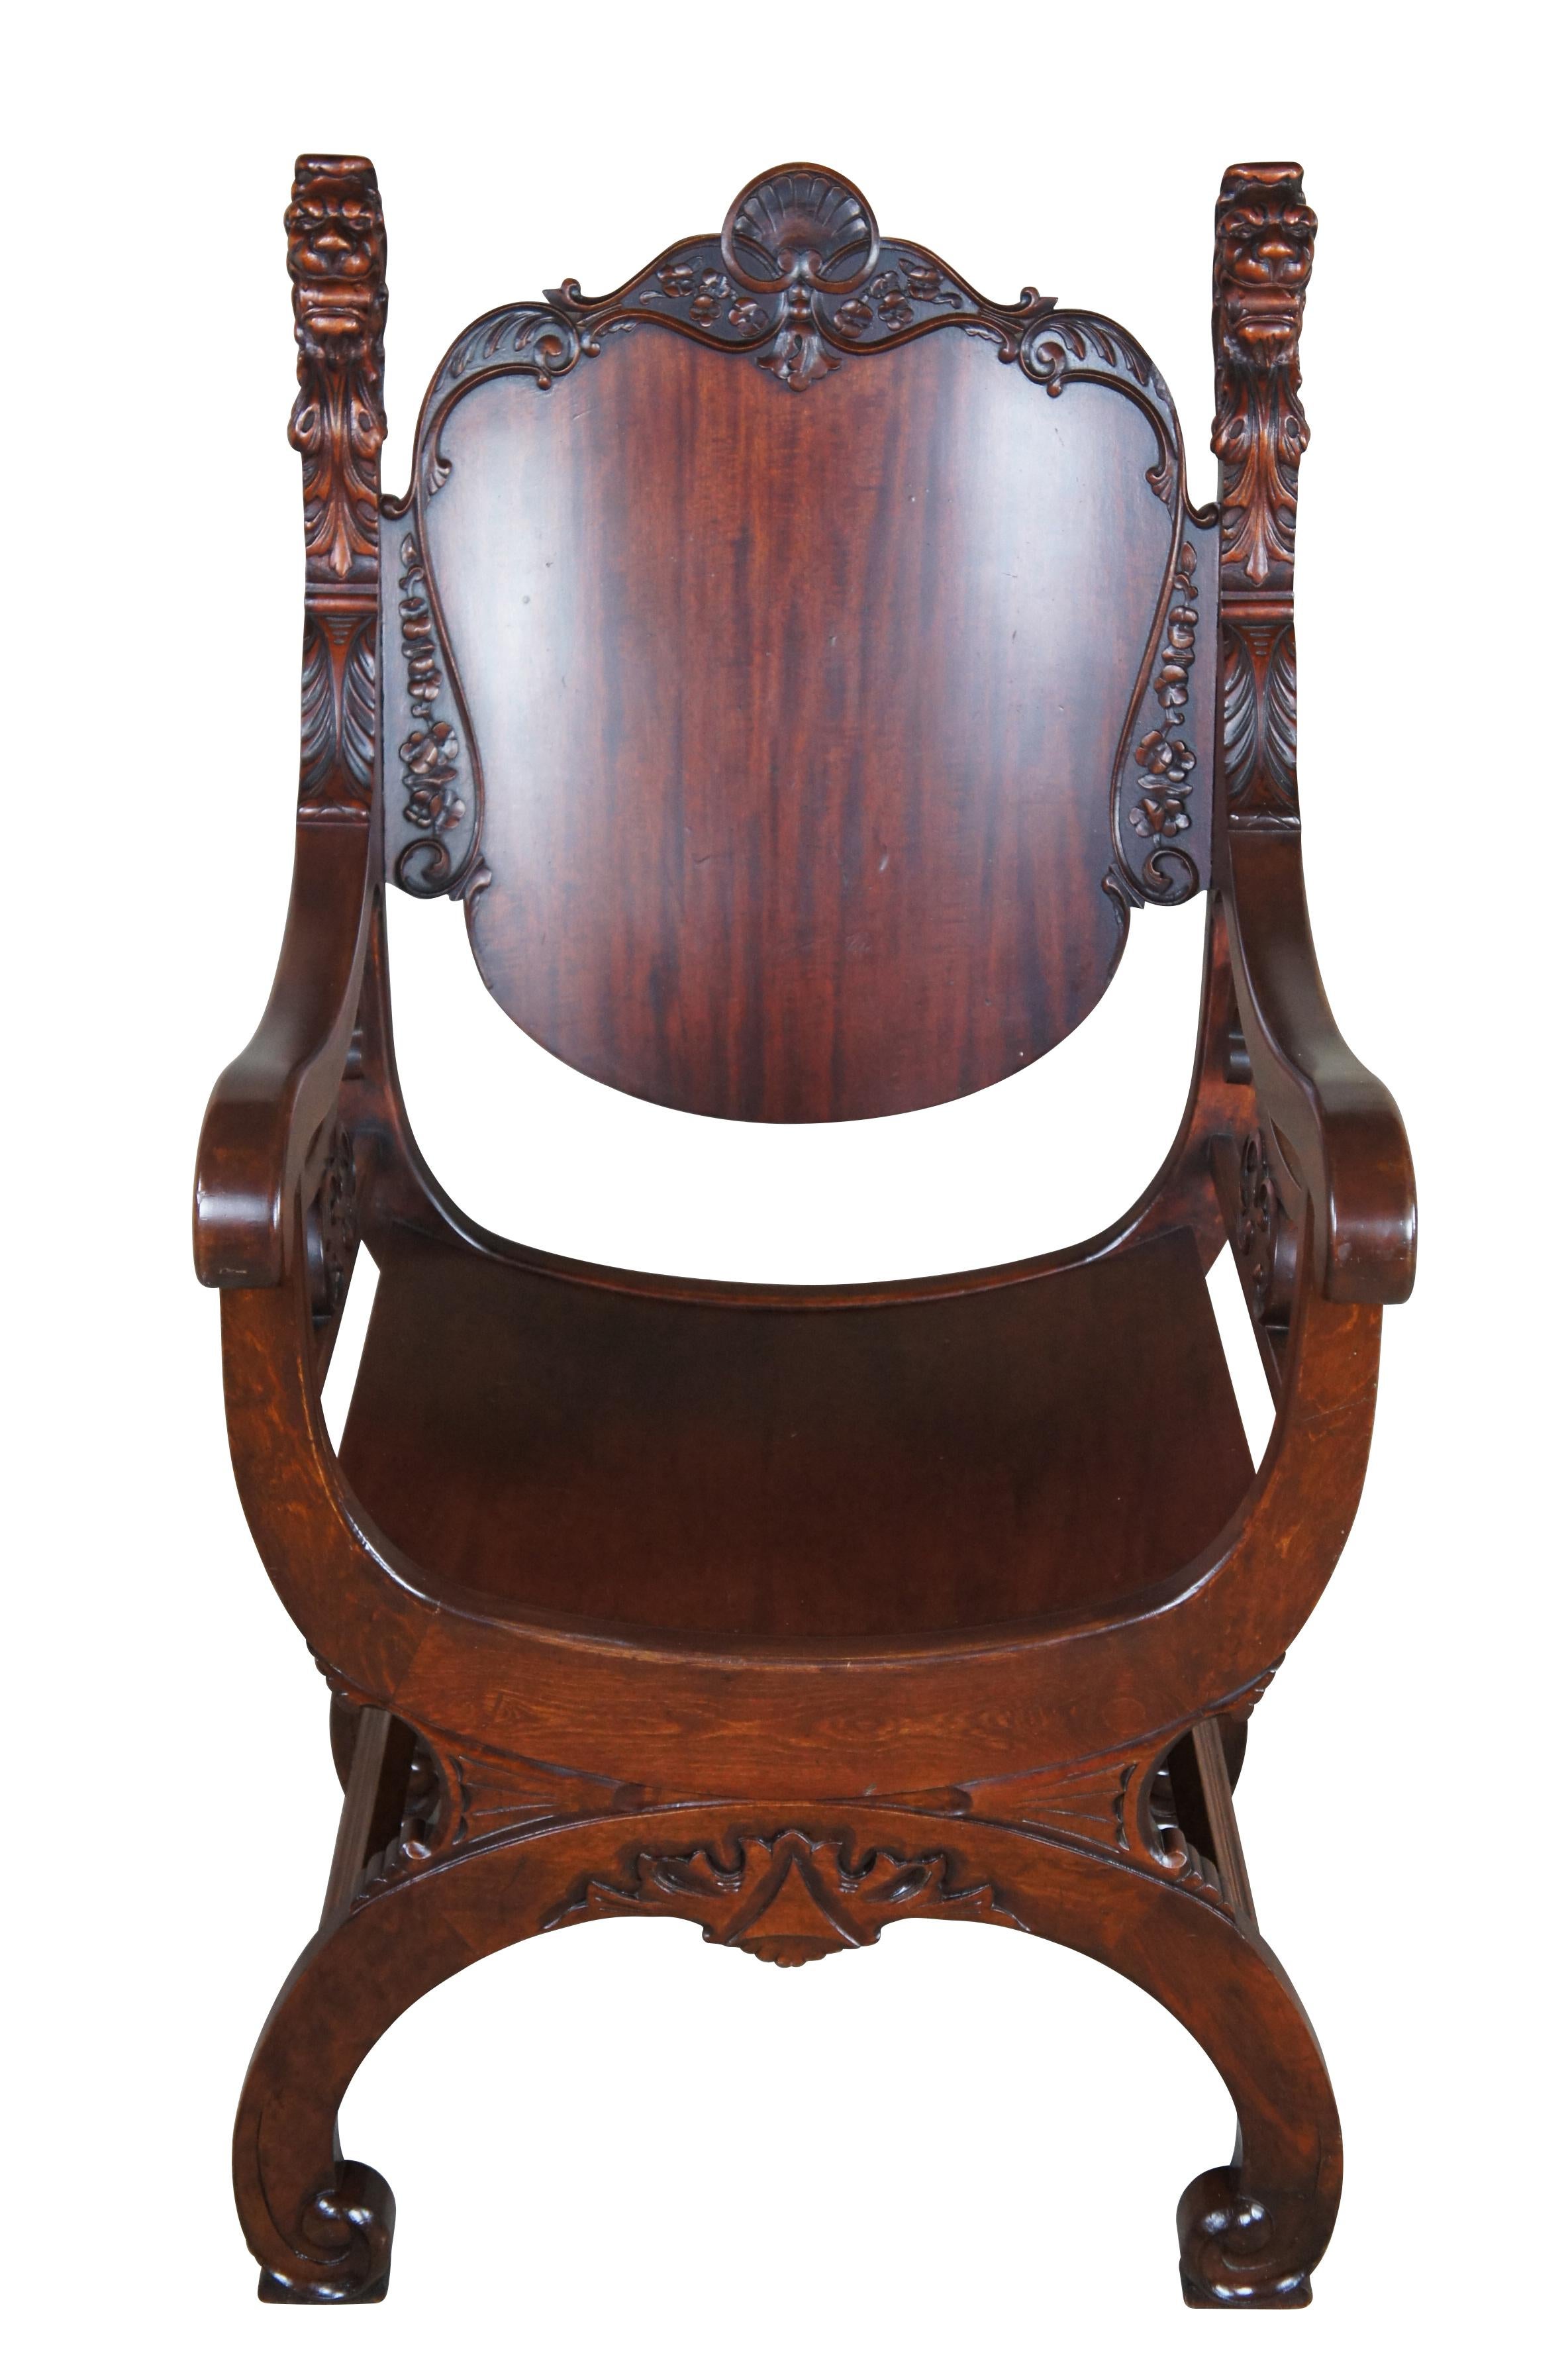 Antique Renaissance Revival throne armchair.  Made of mahogany featuring curule / savonarola styling with carved lion head finials flanking a shield shaped back with shell crest and floral / acanthus accents, supported by curved seat over serpentine